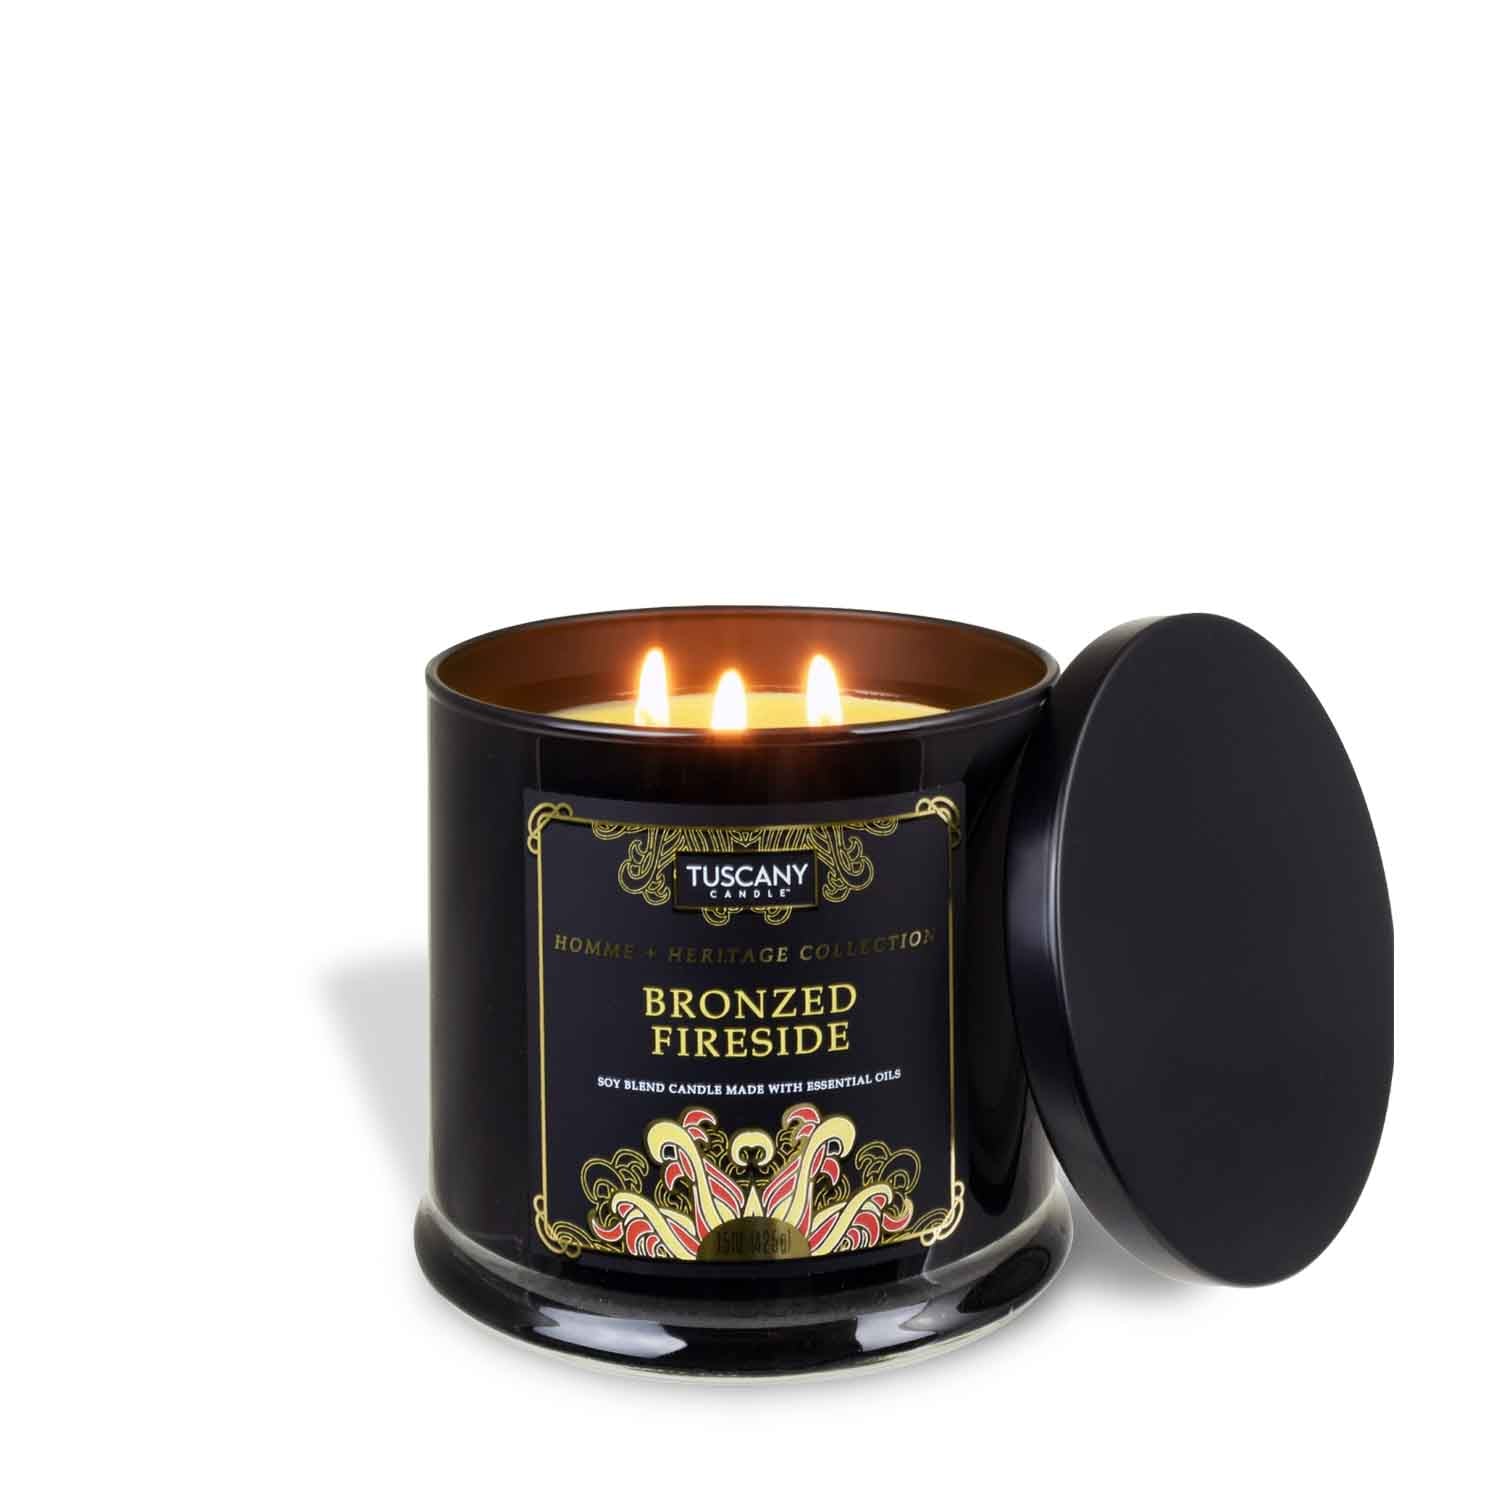 Bronzed Fireside Scented Jar Candle (15 oz) – Homme + Heritage Collect